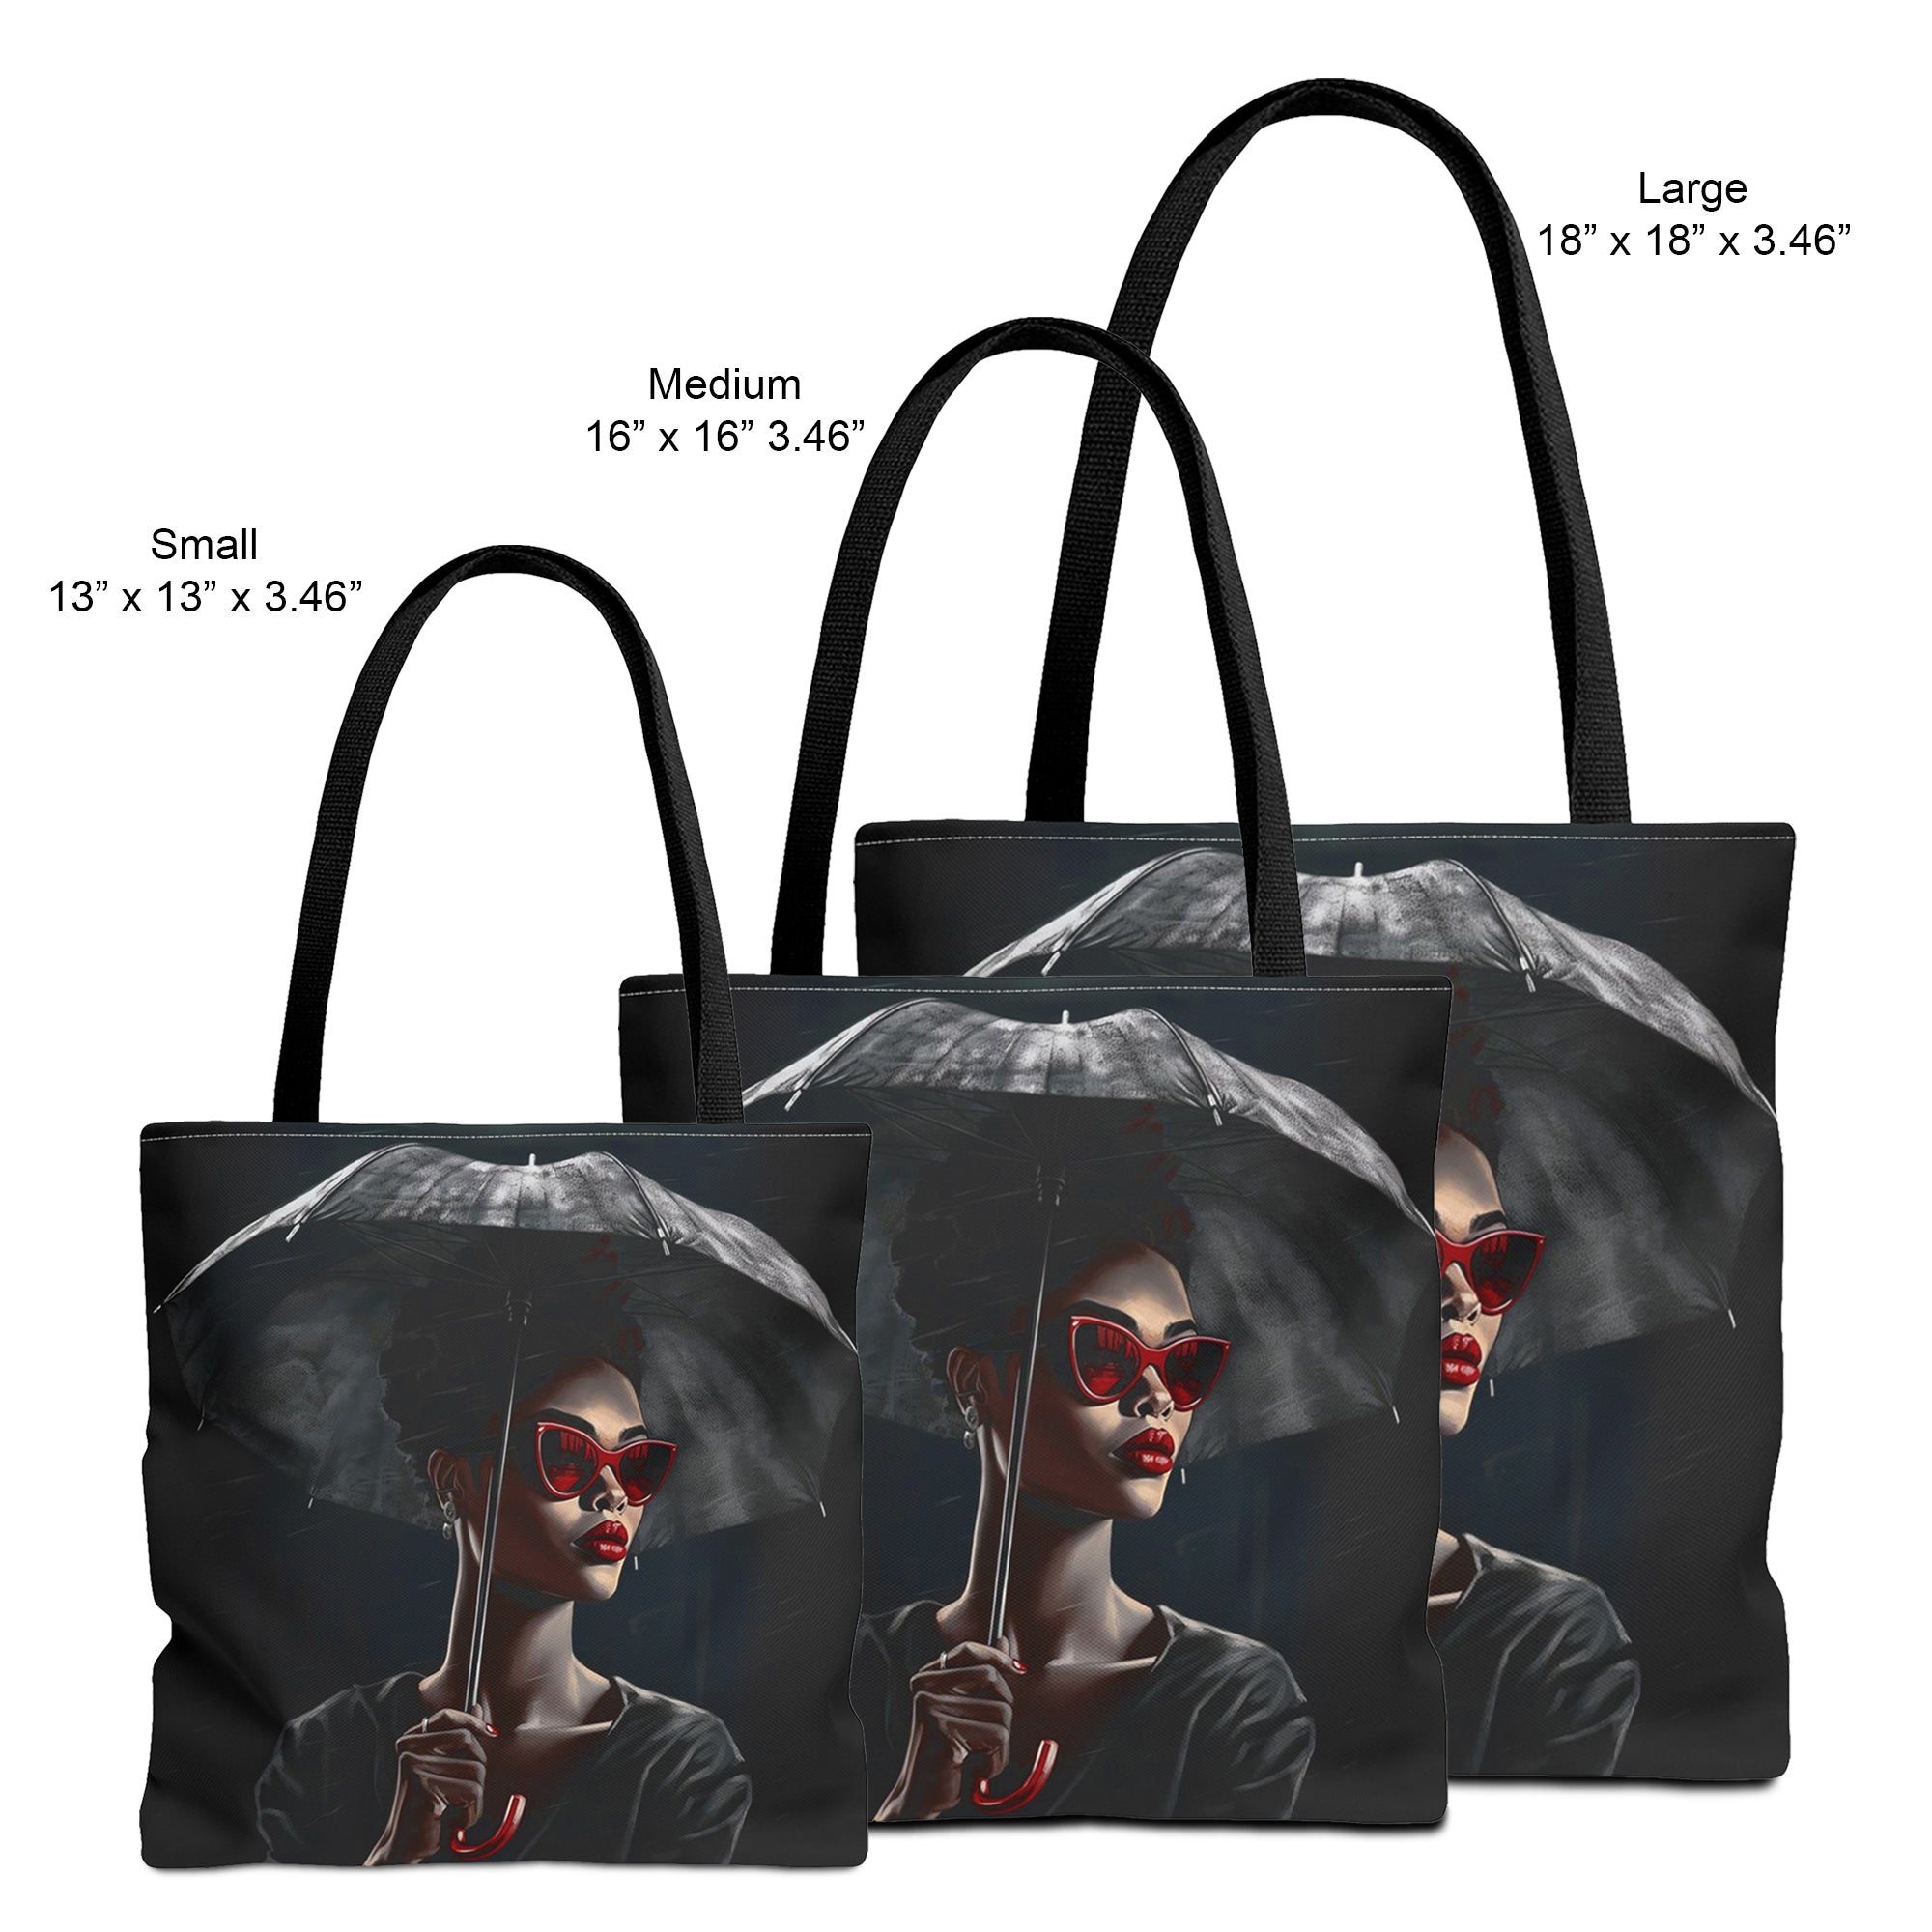 Black Fashionista Tote Bag Stormy Weather - small, medium and large sizes view.